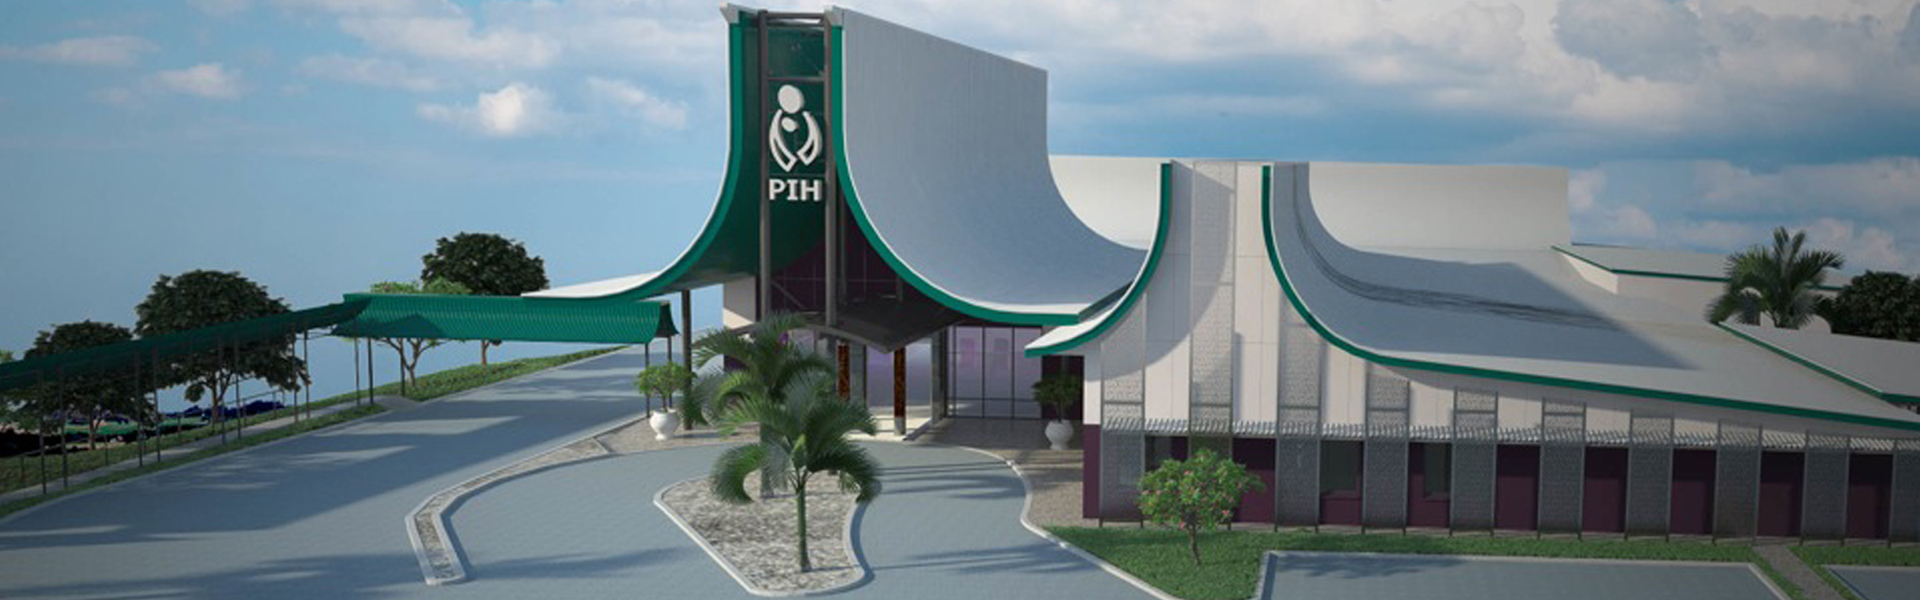  Pacific International Hospital and Specialist Clinics